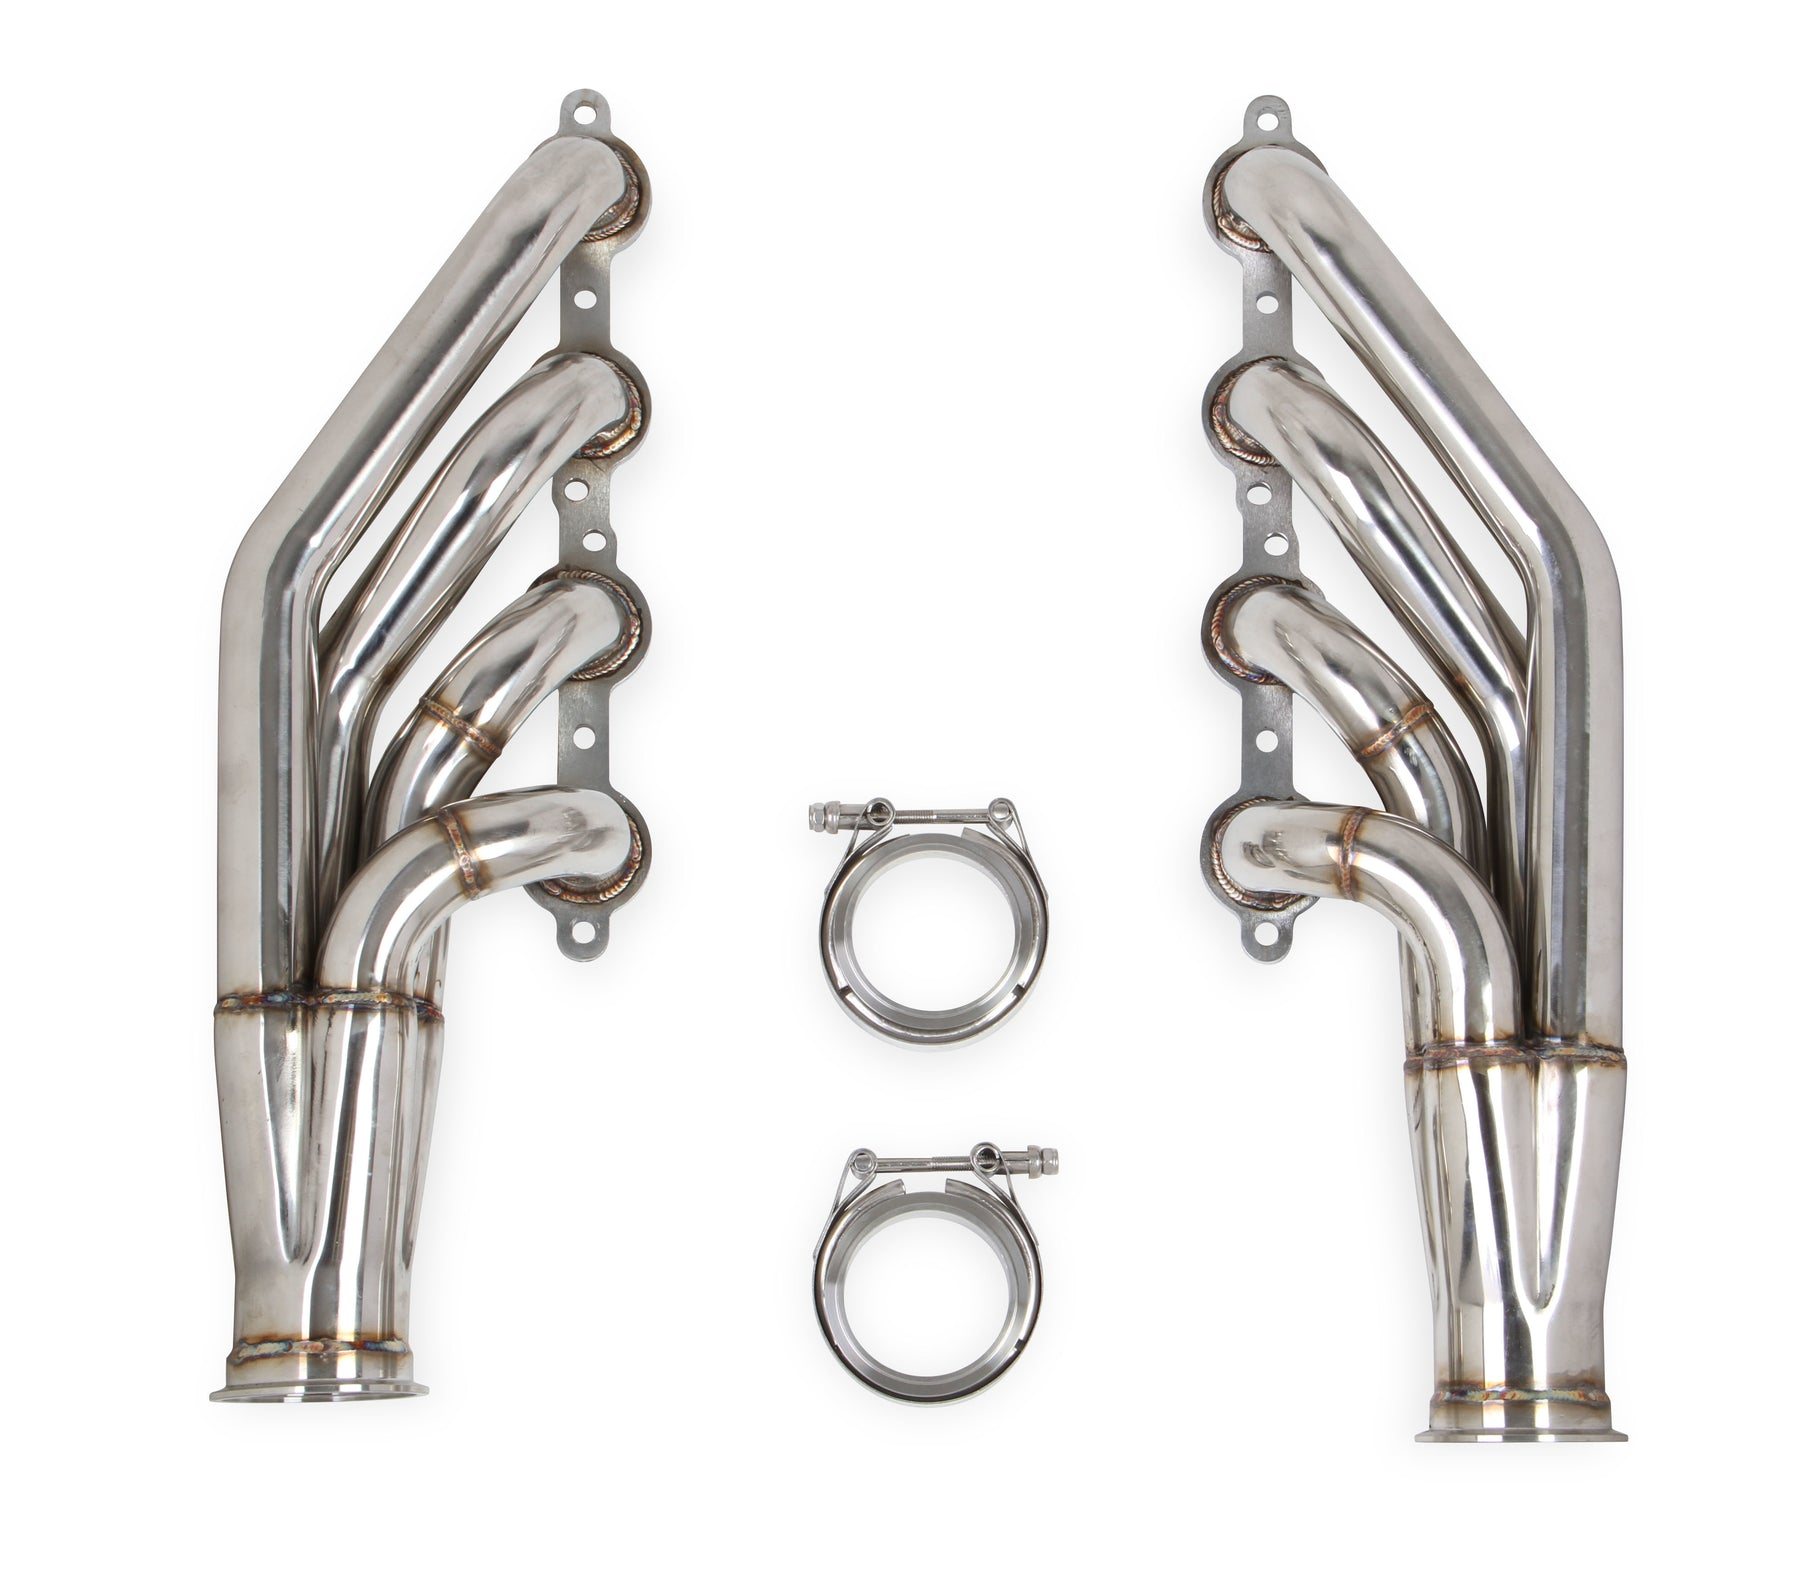 LS 409ss Turbo Headers Up & Forward Style